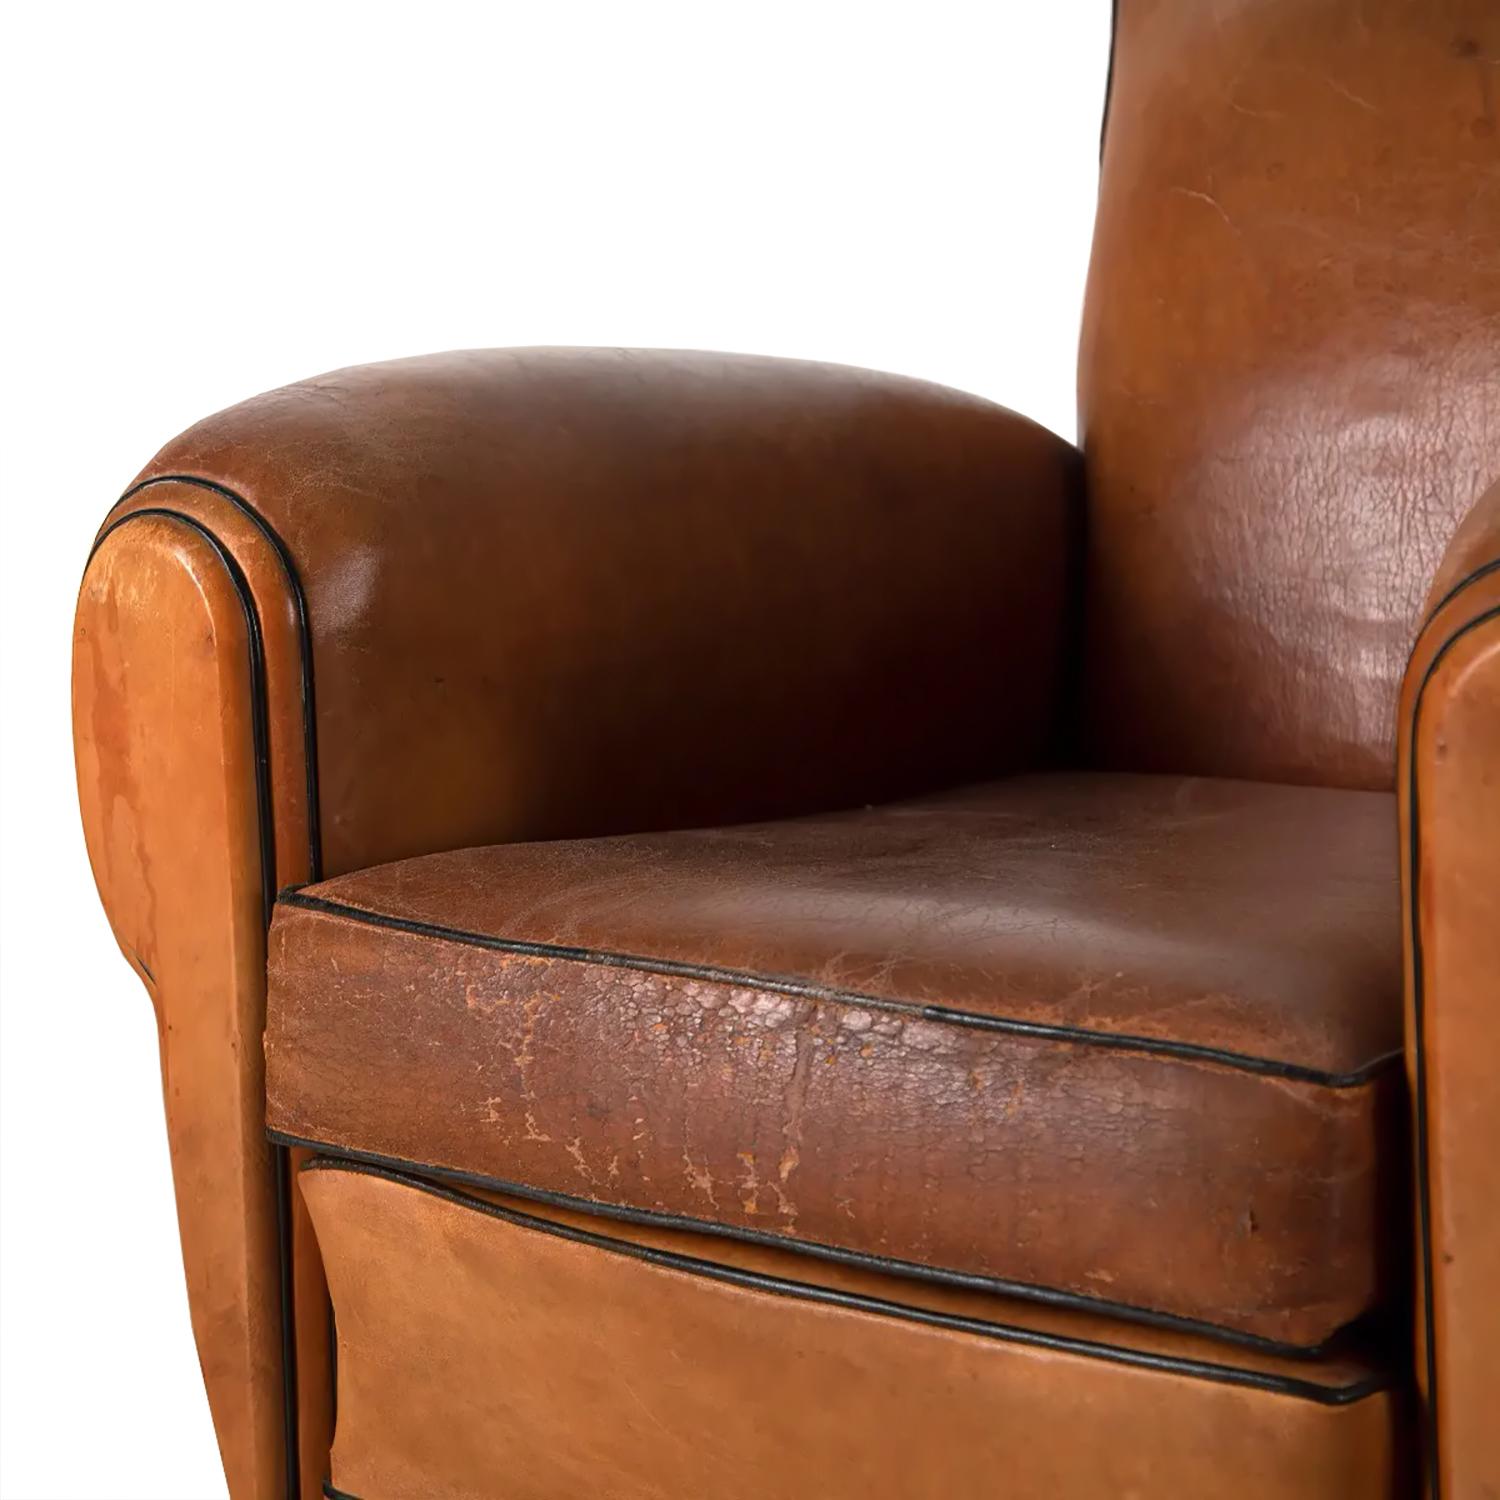 Born in 1929, the often called 'Club Armchair' was inspired by the Art Deco movement and evolved from England and France. Furniture designers seized the opportunity to provide their clients with luxury and comfort in line with new tastes.
The name